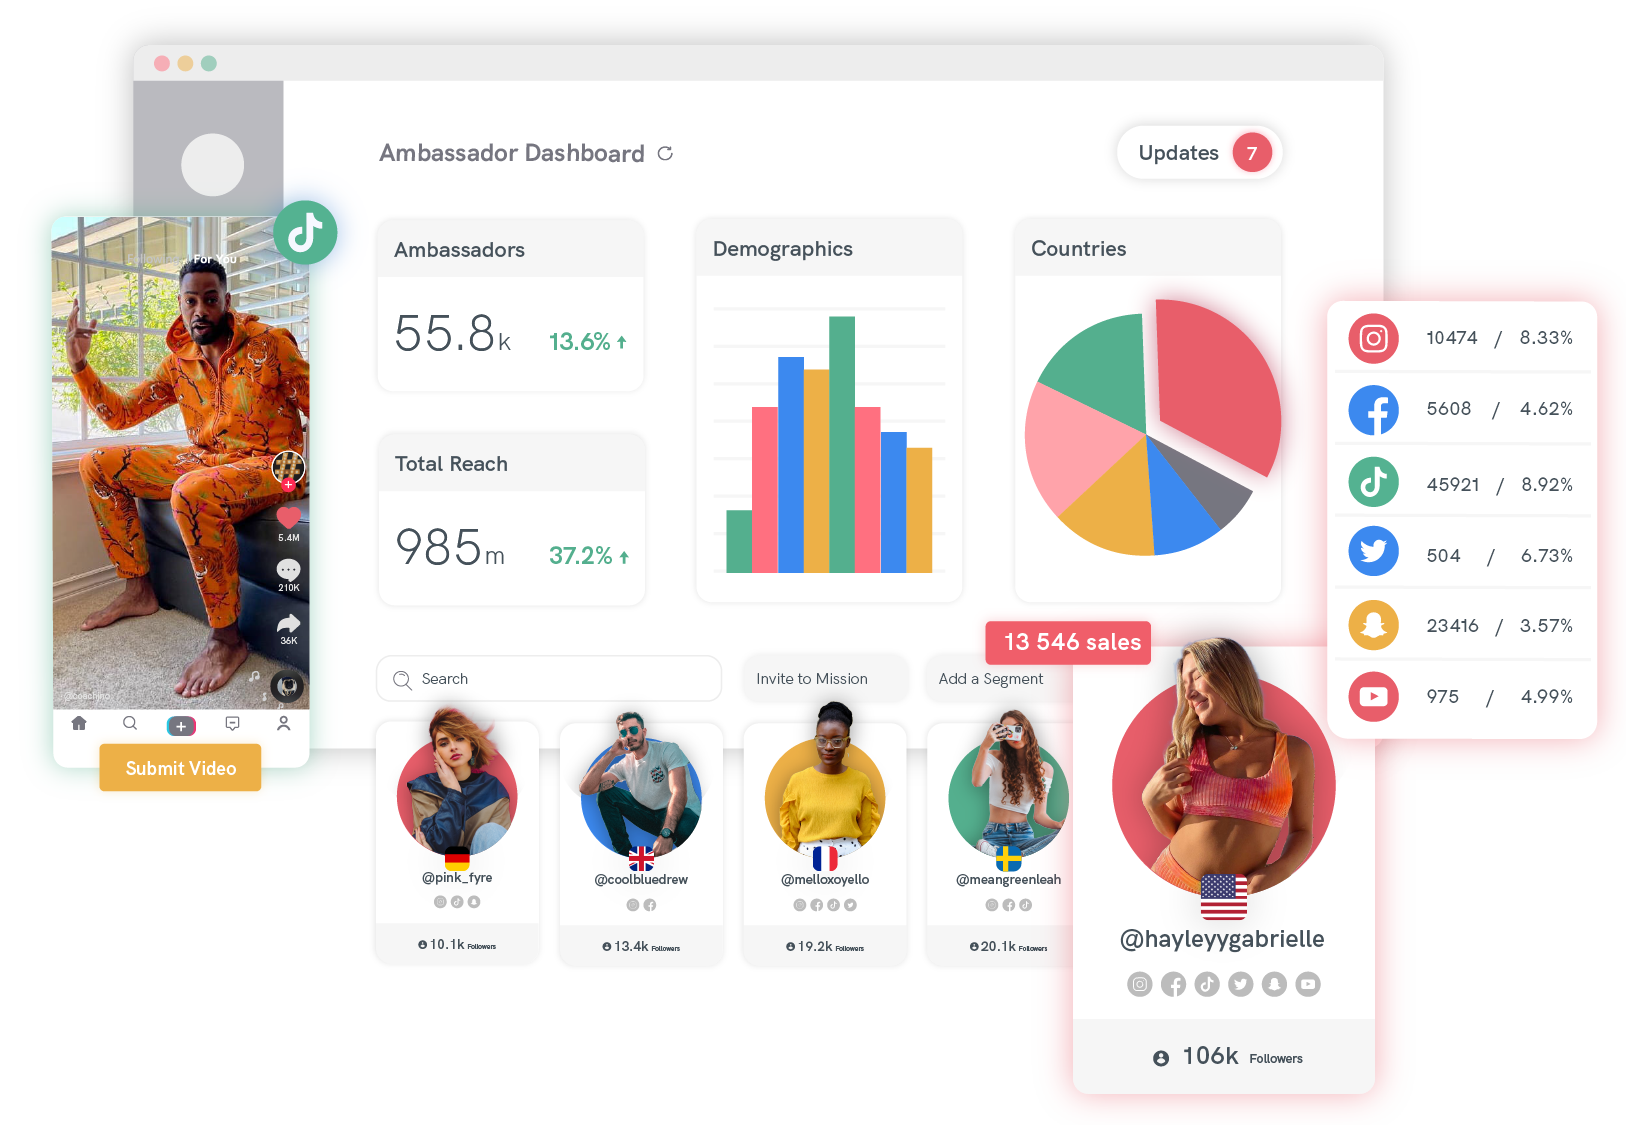 Build and strengthen influencer and ambassador relationships. Support your community, run campaigns, track metrics, and keep all communications in one place. Reach your community of ambassadors and microinfluencers on the go through a gamified mobile app.